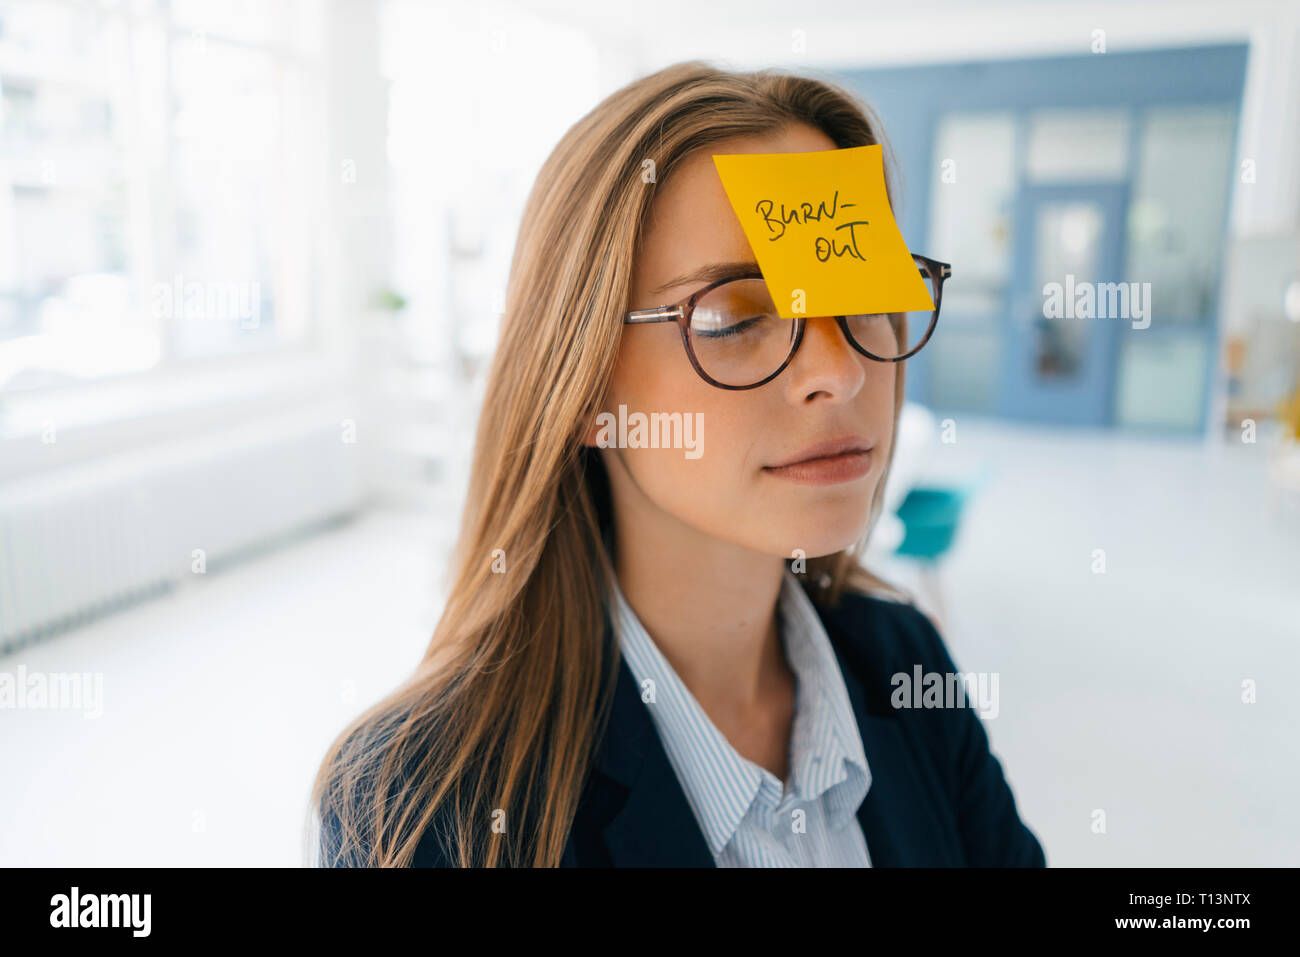 Self stick notes hi-res stock photography and images - Alamy